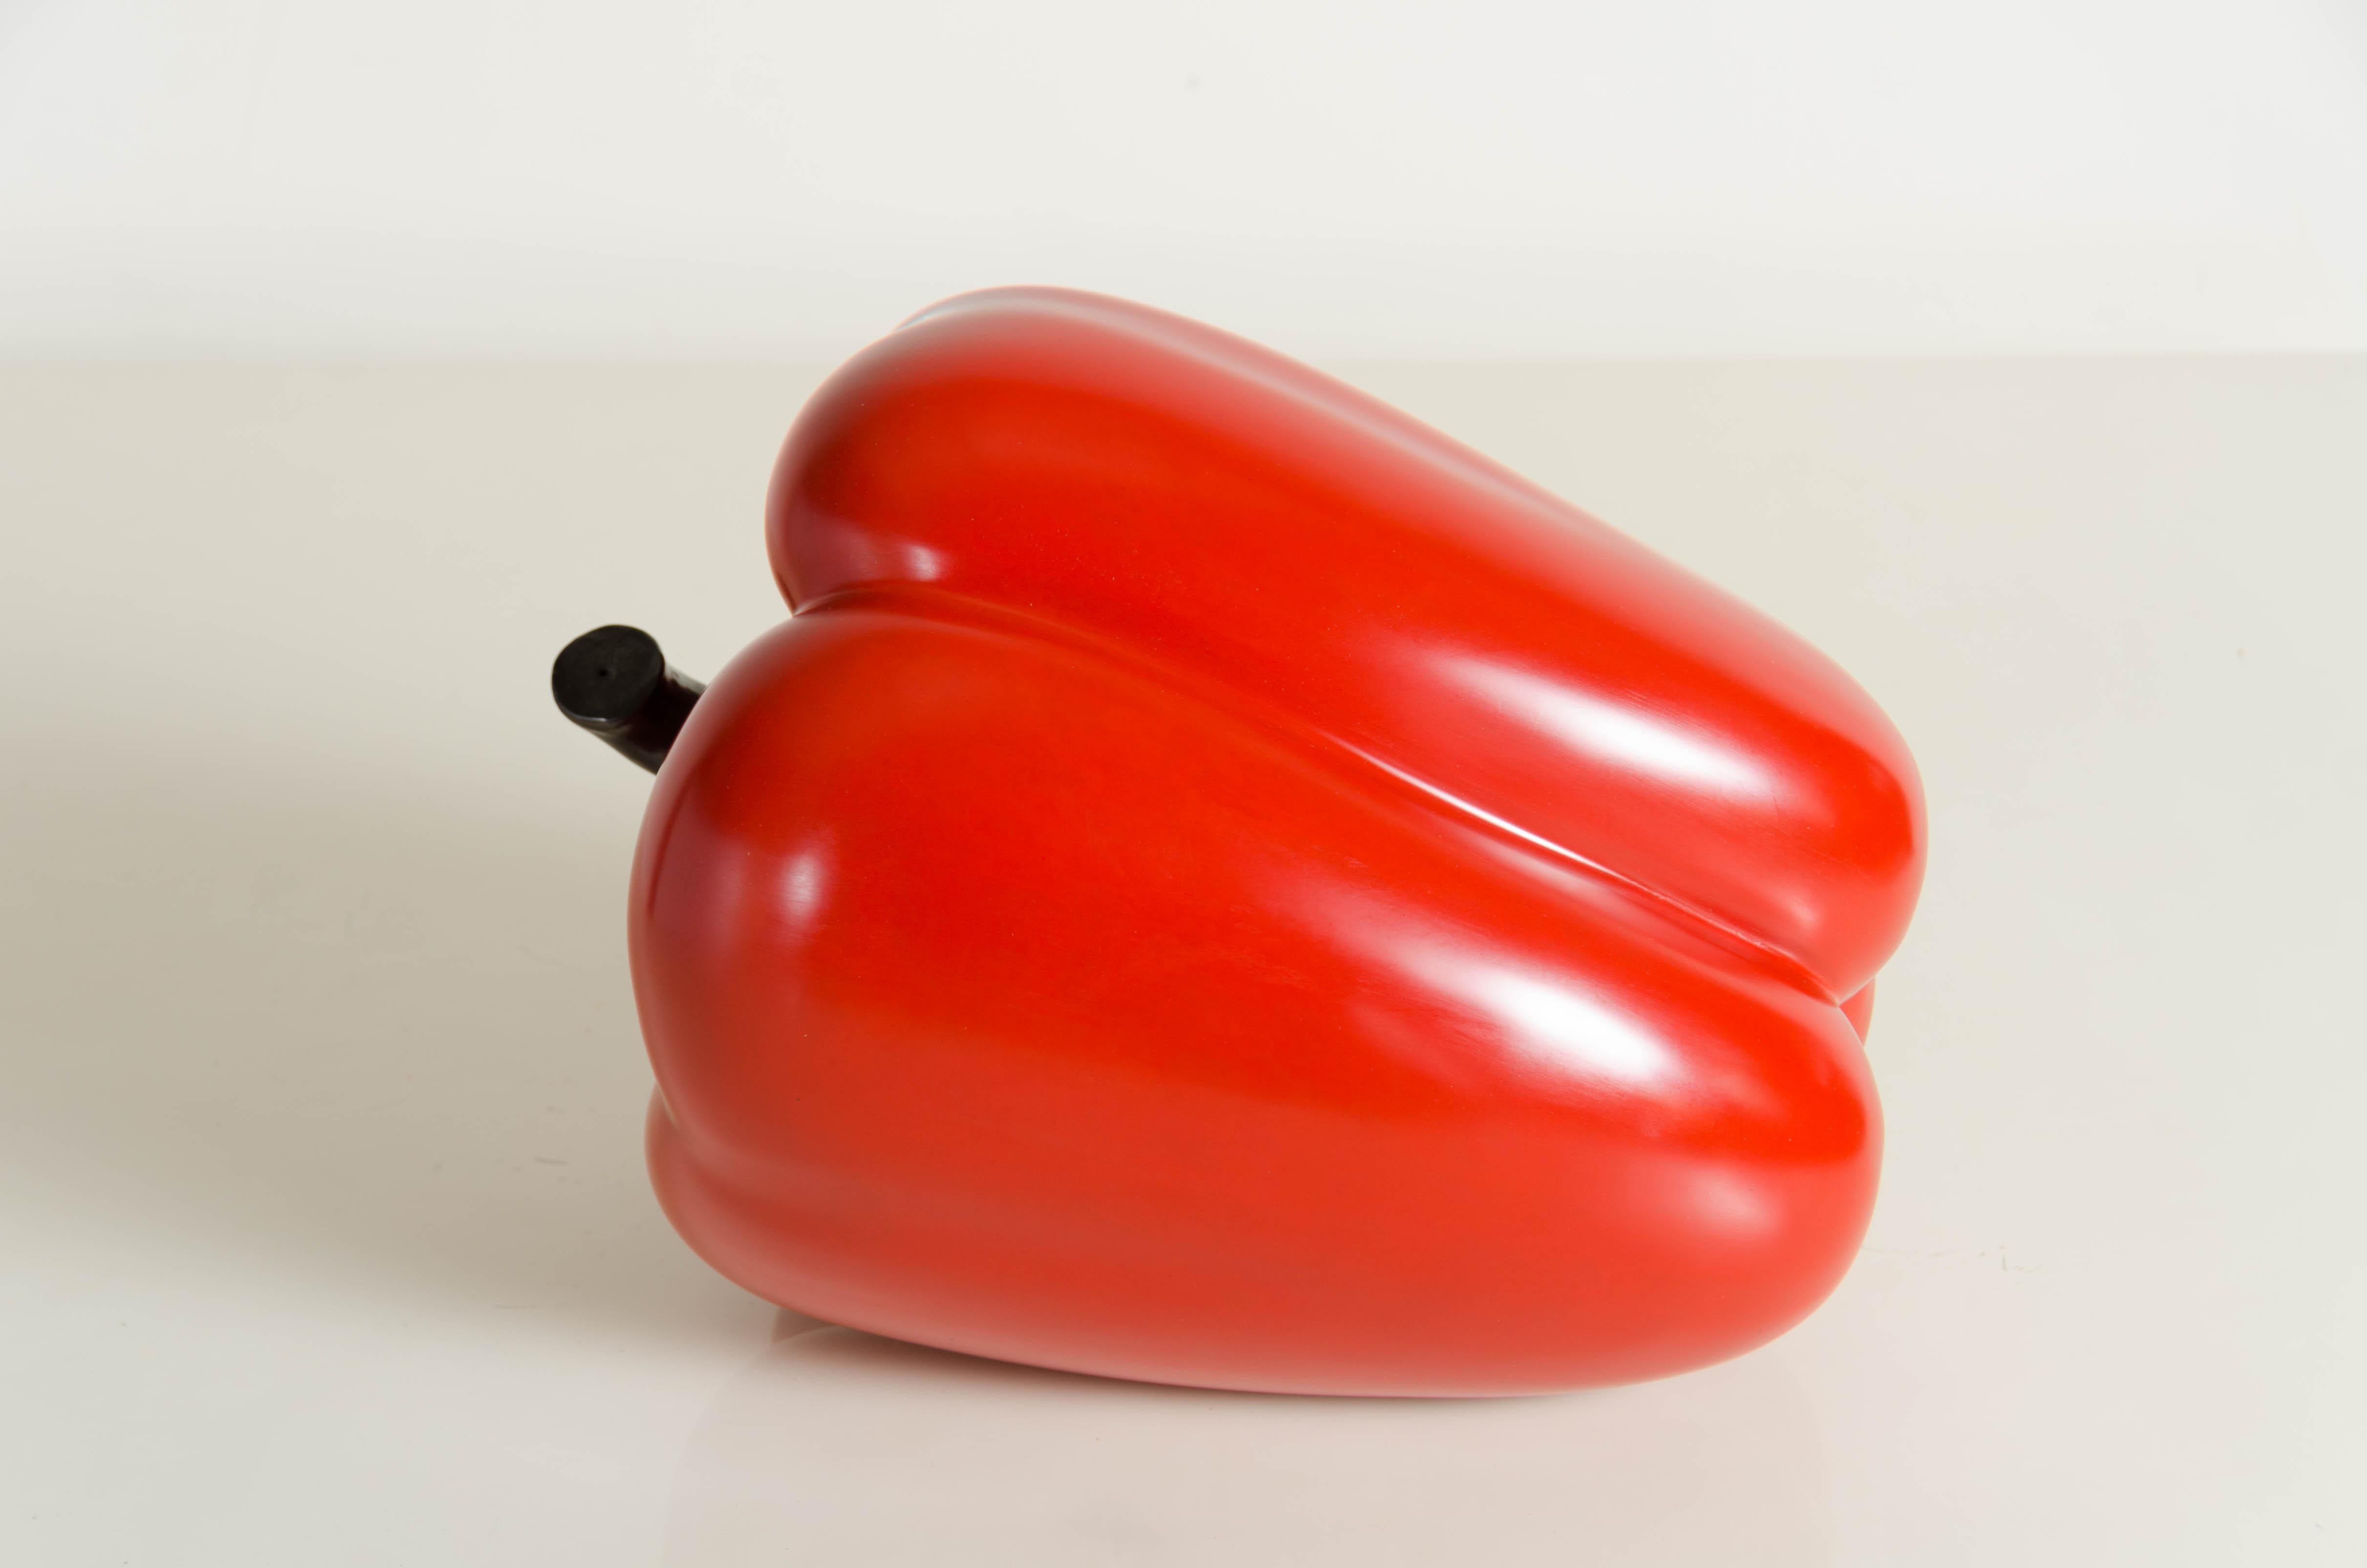 Repoussé Bell Pepper, Red Lacquer by Robert Kuo, Hand Repousse, Limited Edition For Sale